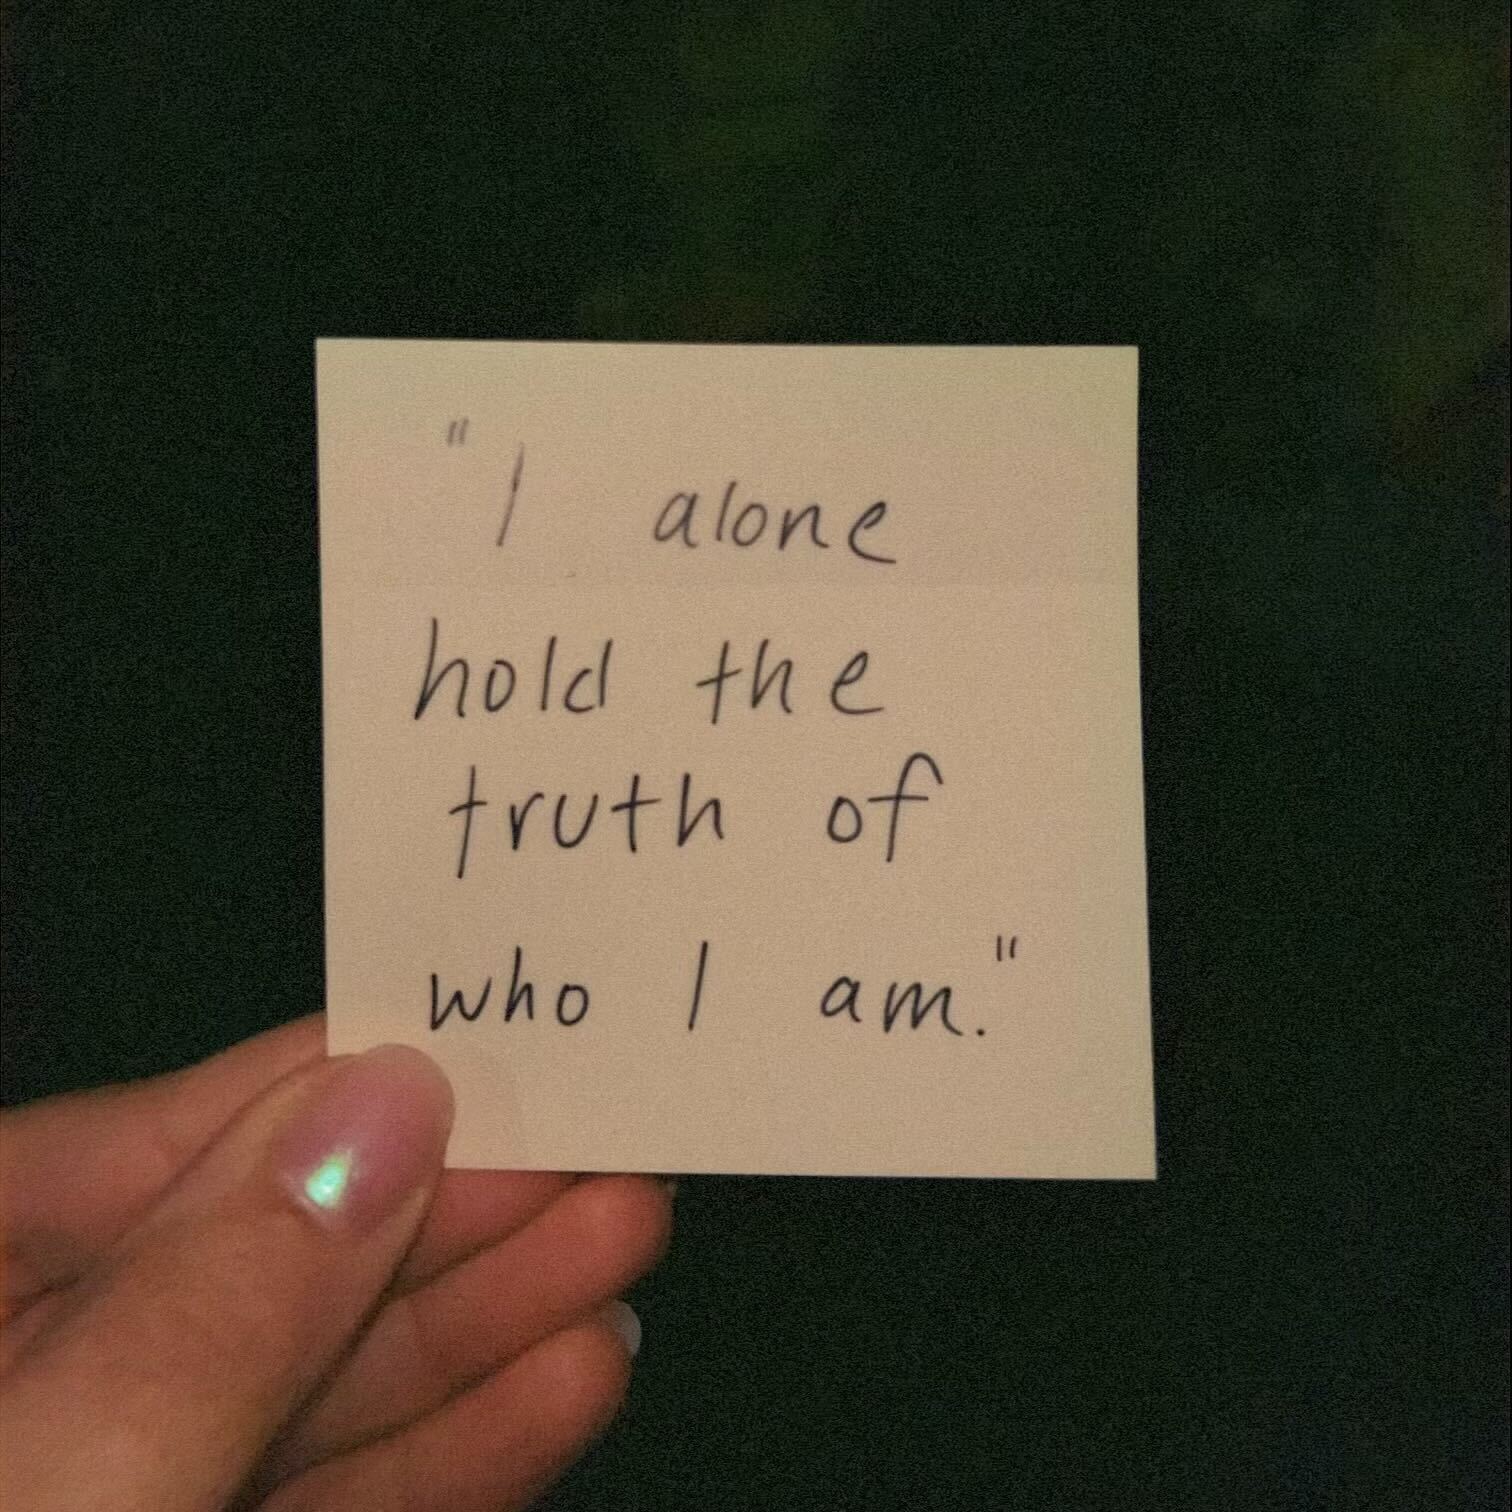 A sticky note held up reading, "I alone hold the trust of who I am".